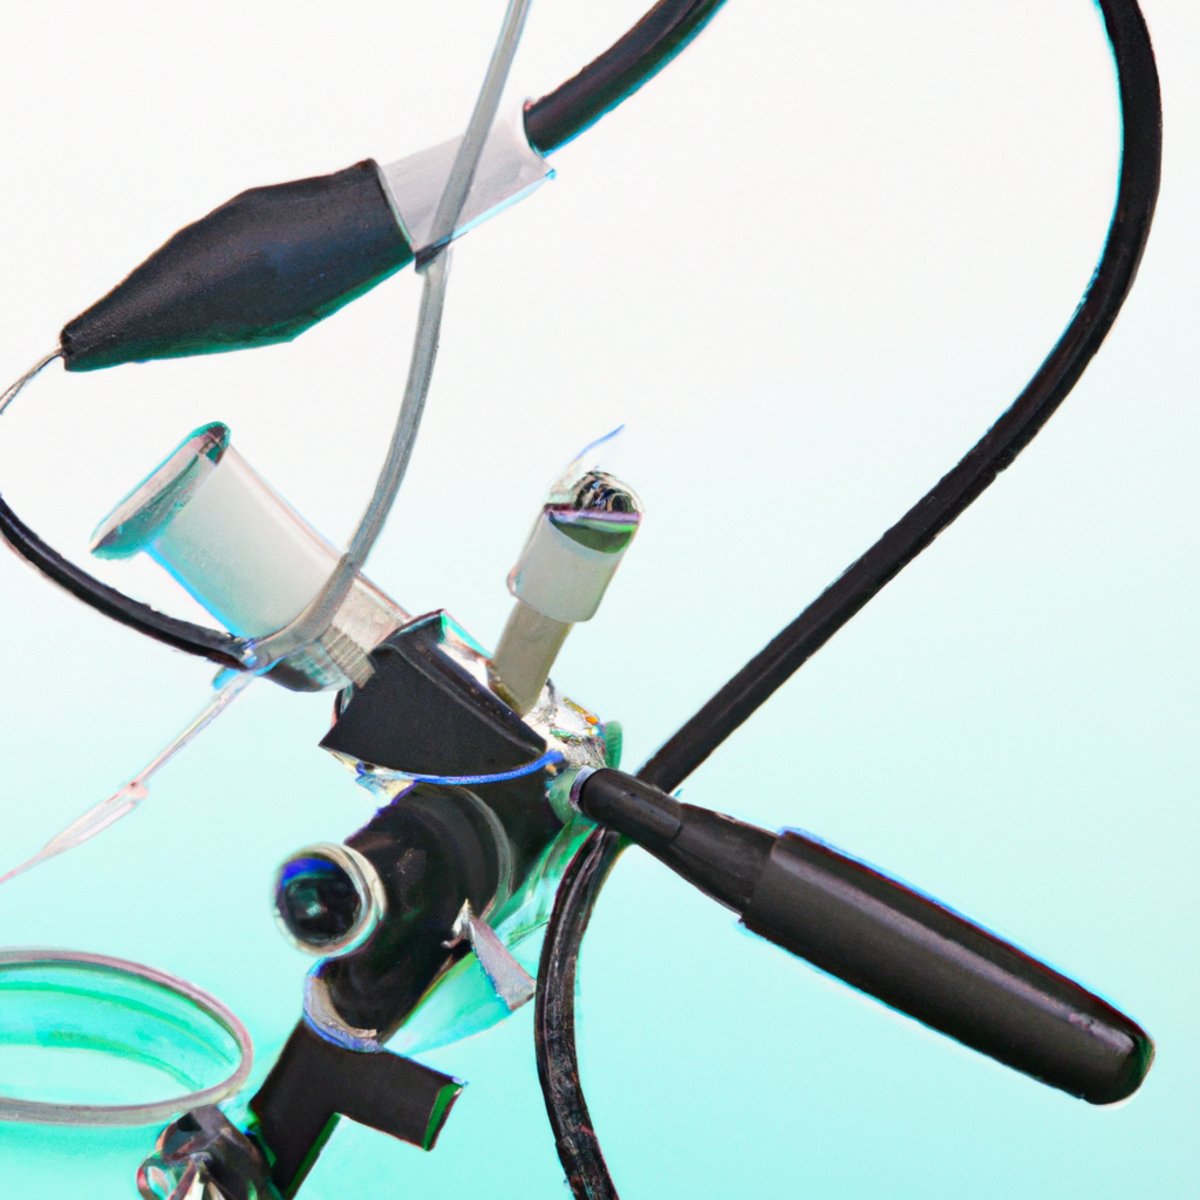 Close-up of medical endoscope used for diagnosing and treating GAVE, surrounded by sterile medical equipment -Gastric antral vascular ectasia (GAVE)